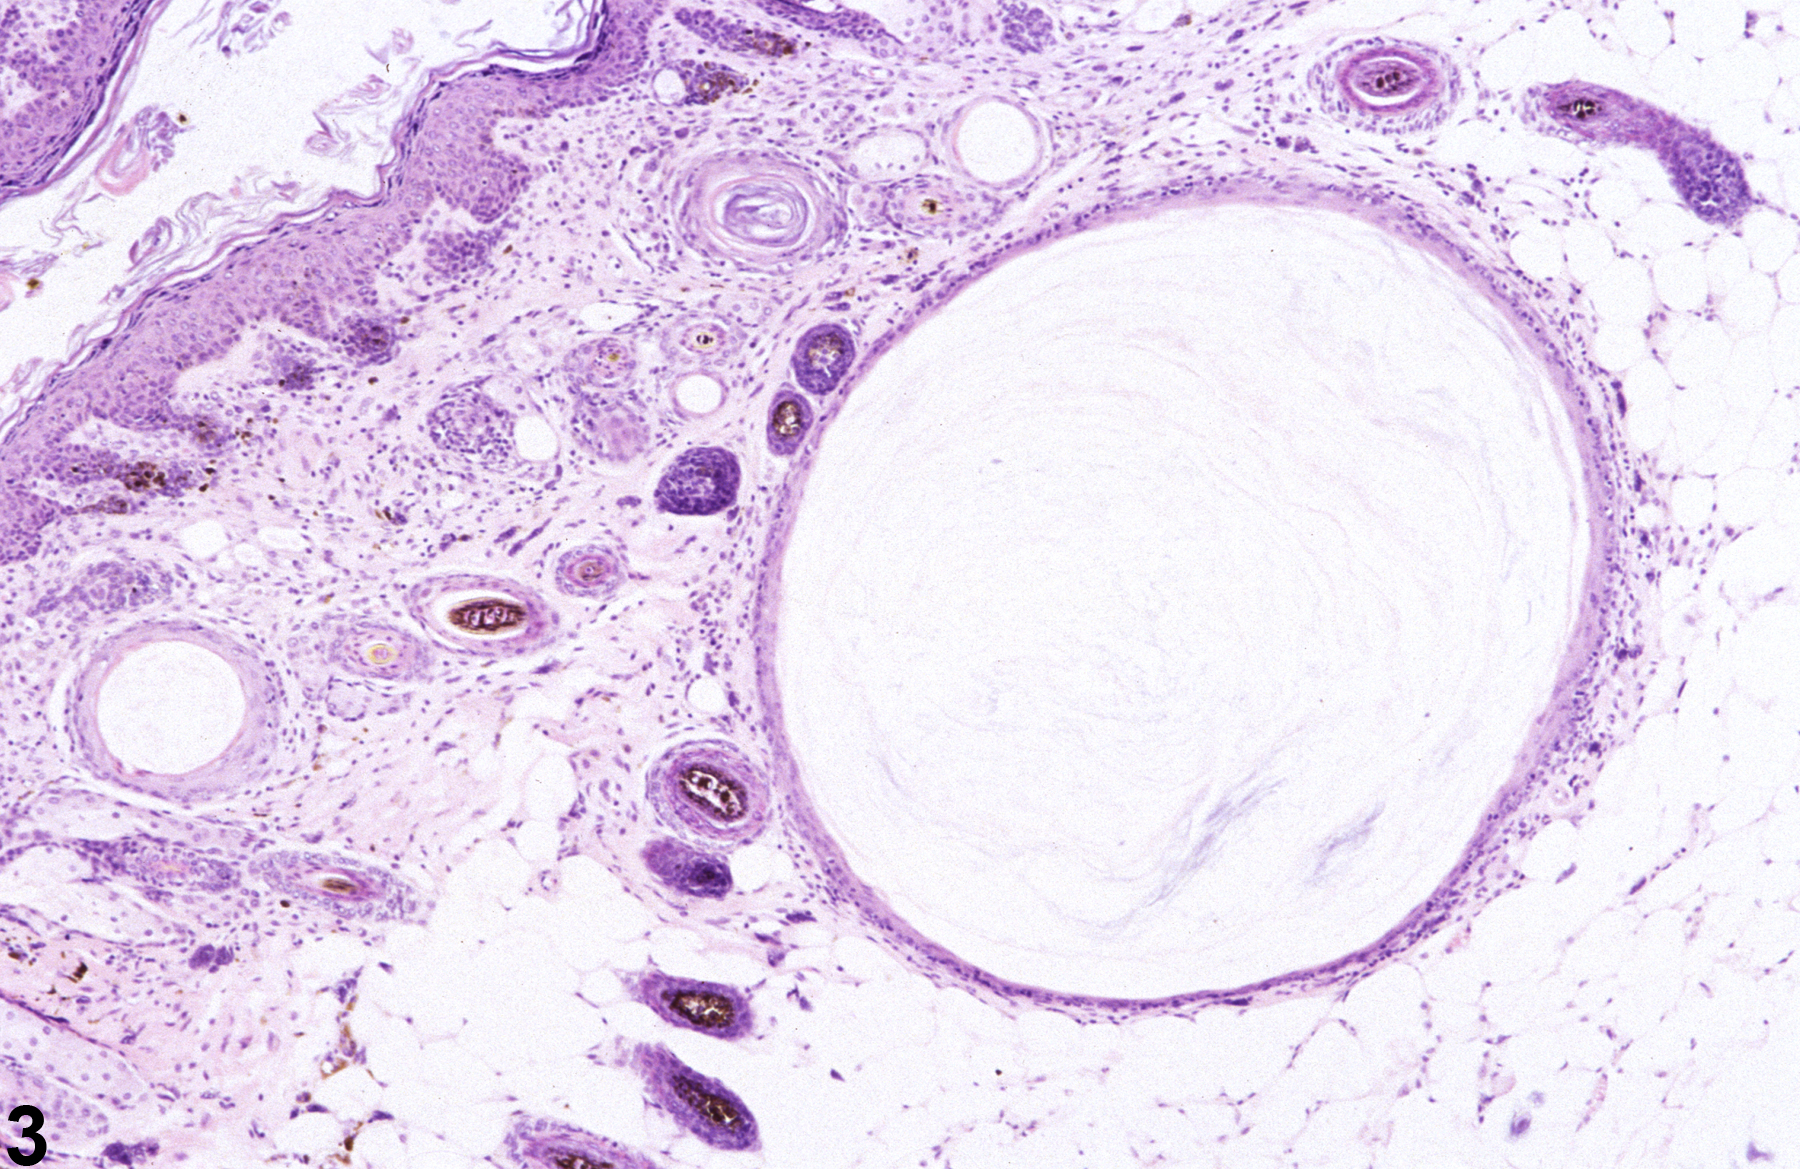 Image of cyst in the skin epithelium from a male B6C3F1 mouse in a chronic study